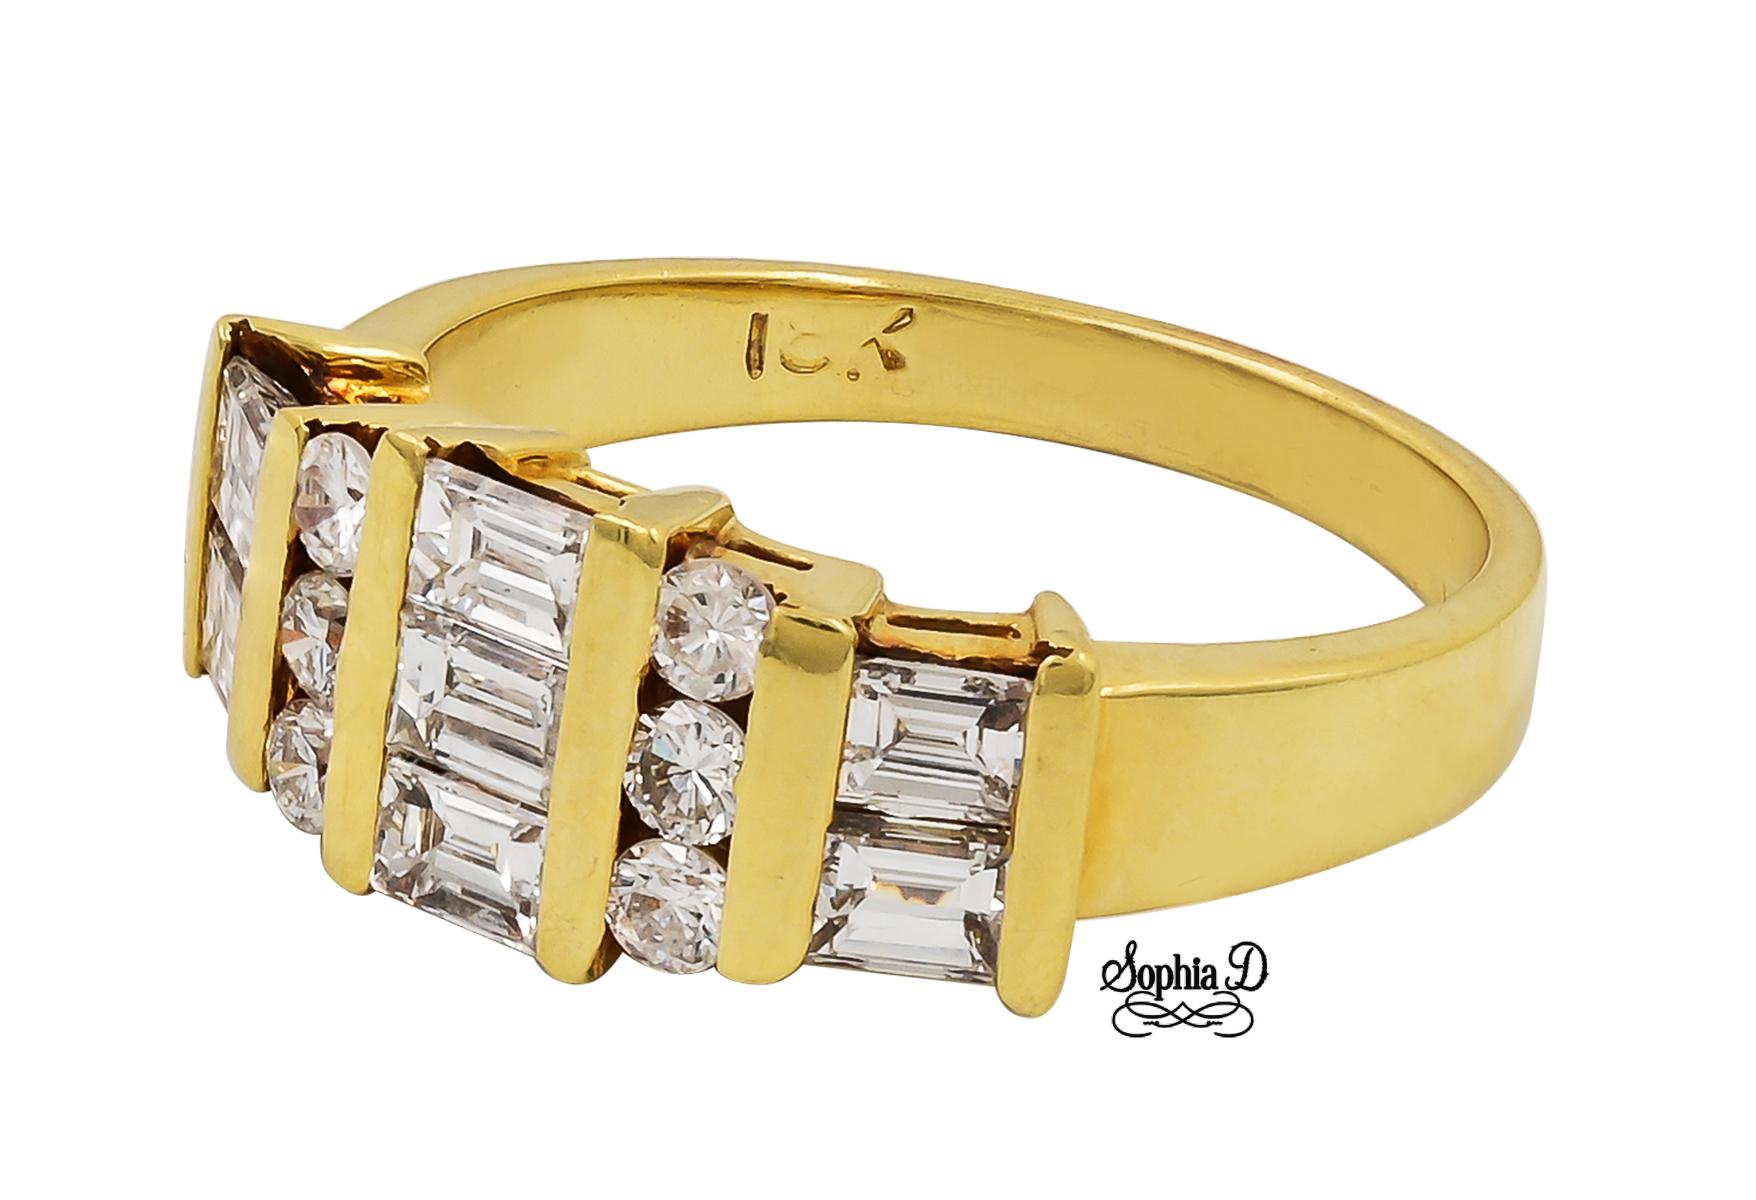 14K Yellow Gold Ring with 10 square cut diamonds.

Sophia D by Joseph Dardashti LTD has been known worldwide for 35 years and are inspired by classic Art Deco design that merges with modern manufacturing techniques.